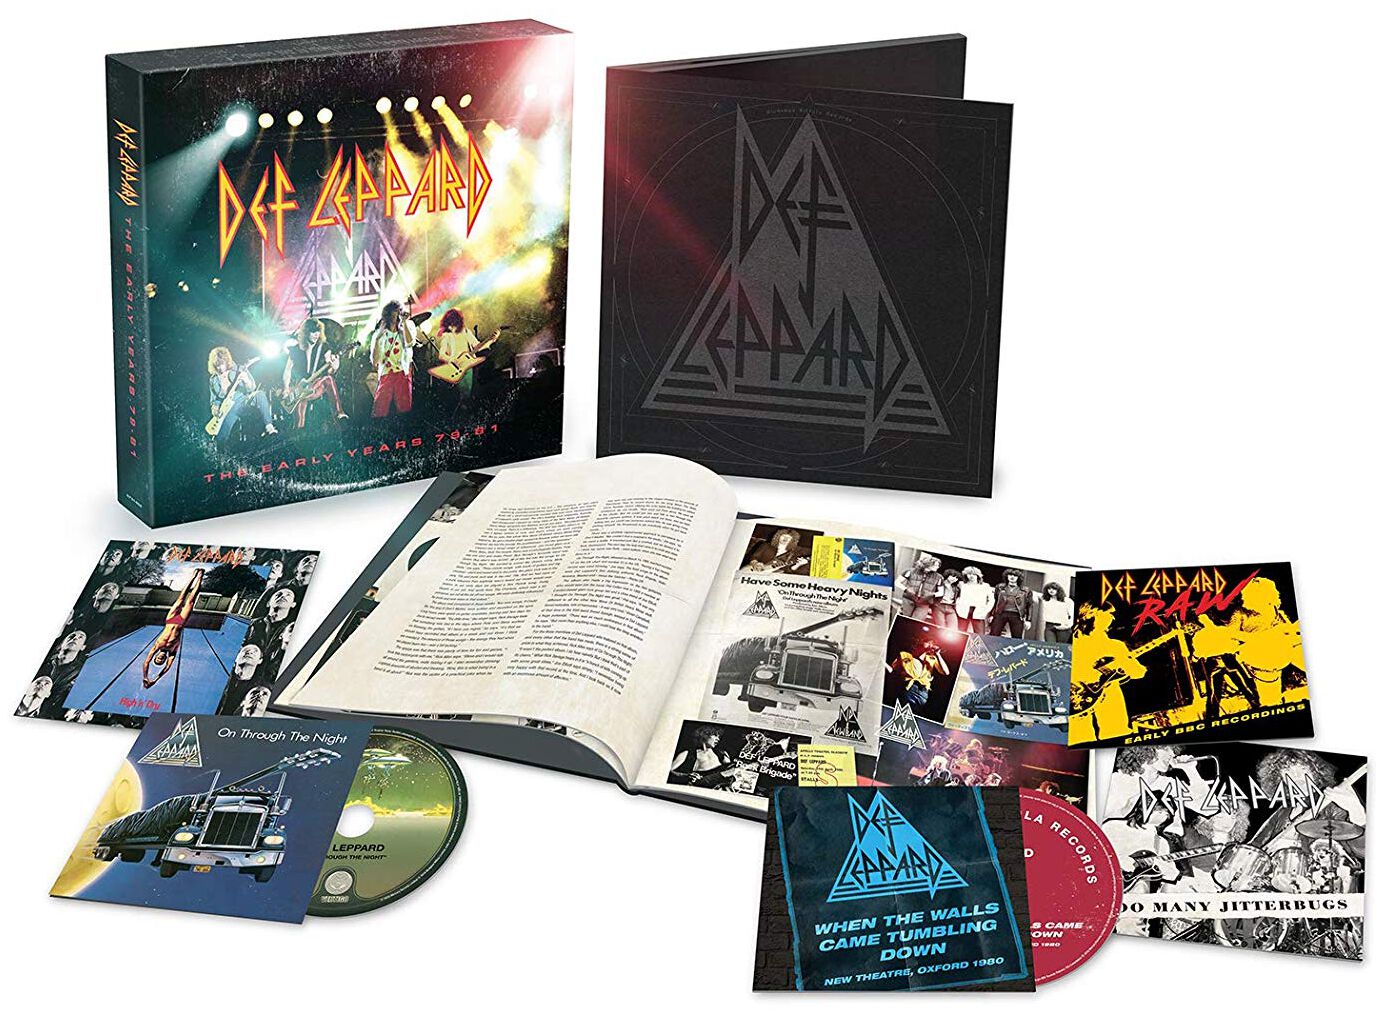 Image of Def Leppard The early years 79-81 5-CD Standard